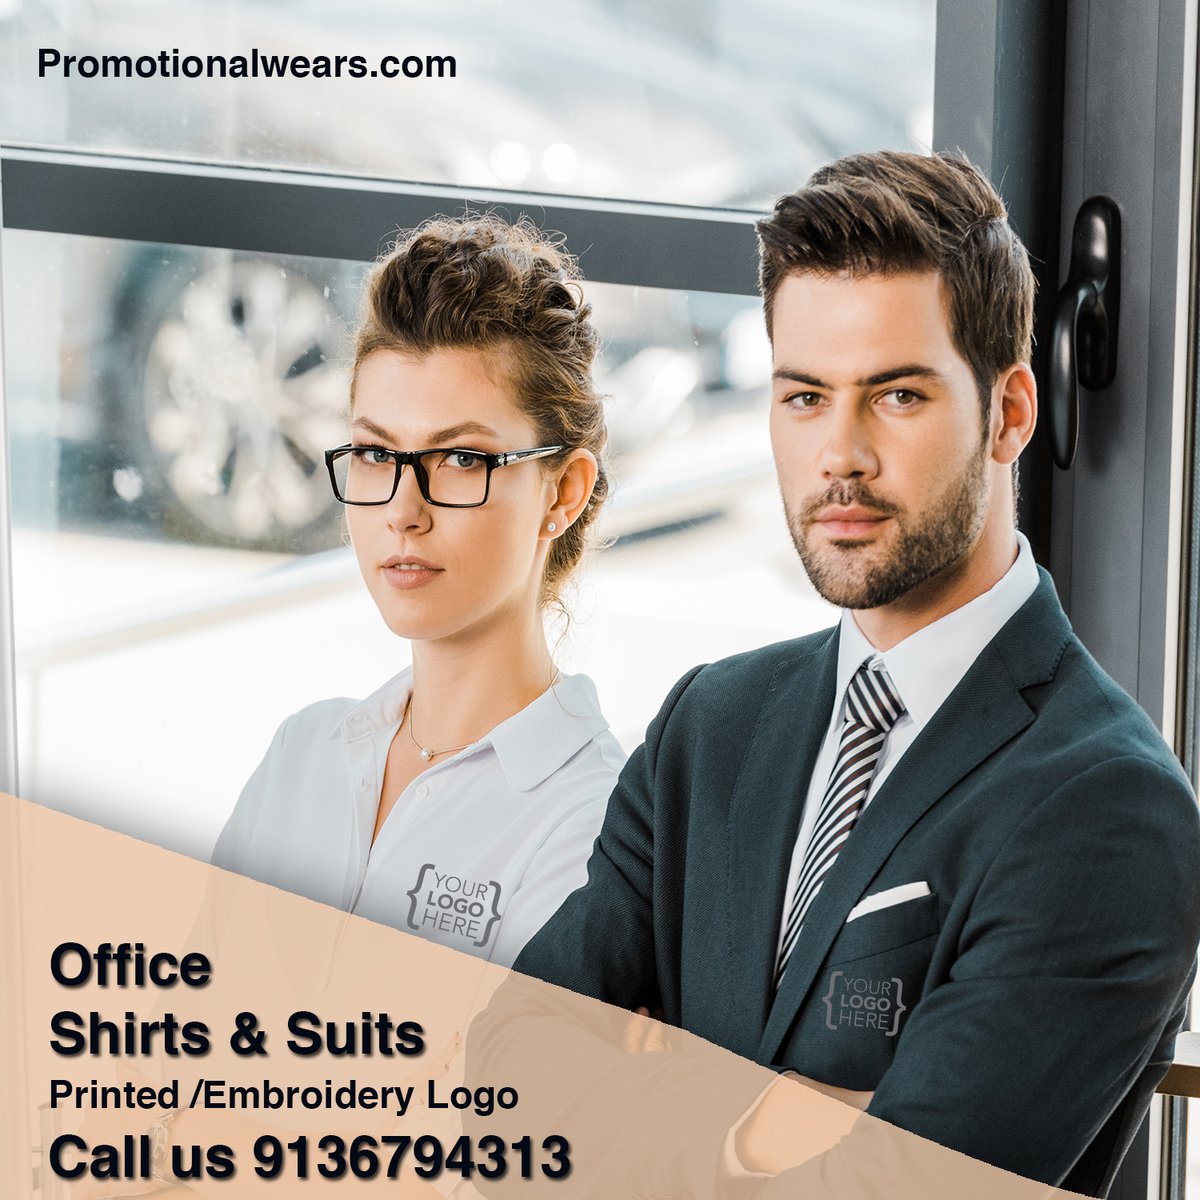 Buy business Shirts and Suits with your Own logo 
Shop Now- bit.ly/3cIfDqy
#business #businessshirts #shirts #logodesign #embroidery #businessuniform #uniformlogo #shop #professional #professionalbusiness #professionaluniform #businessteam #team #union #office